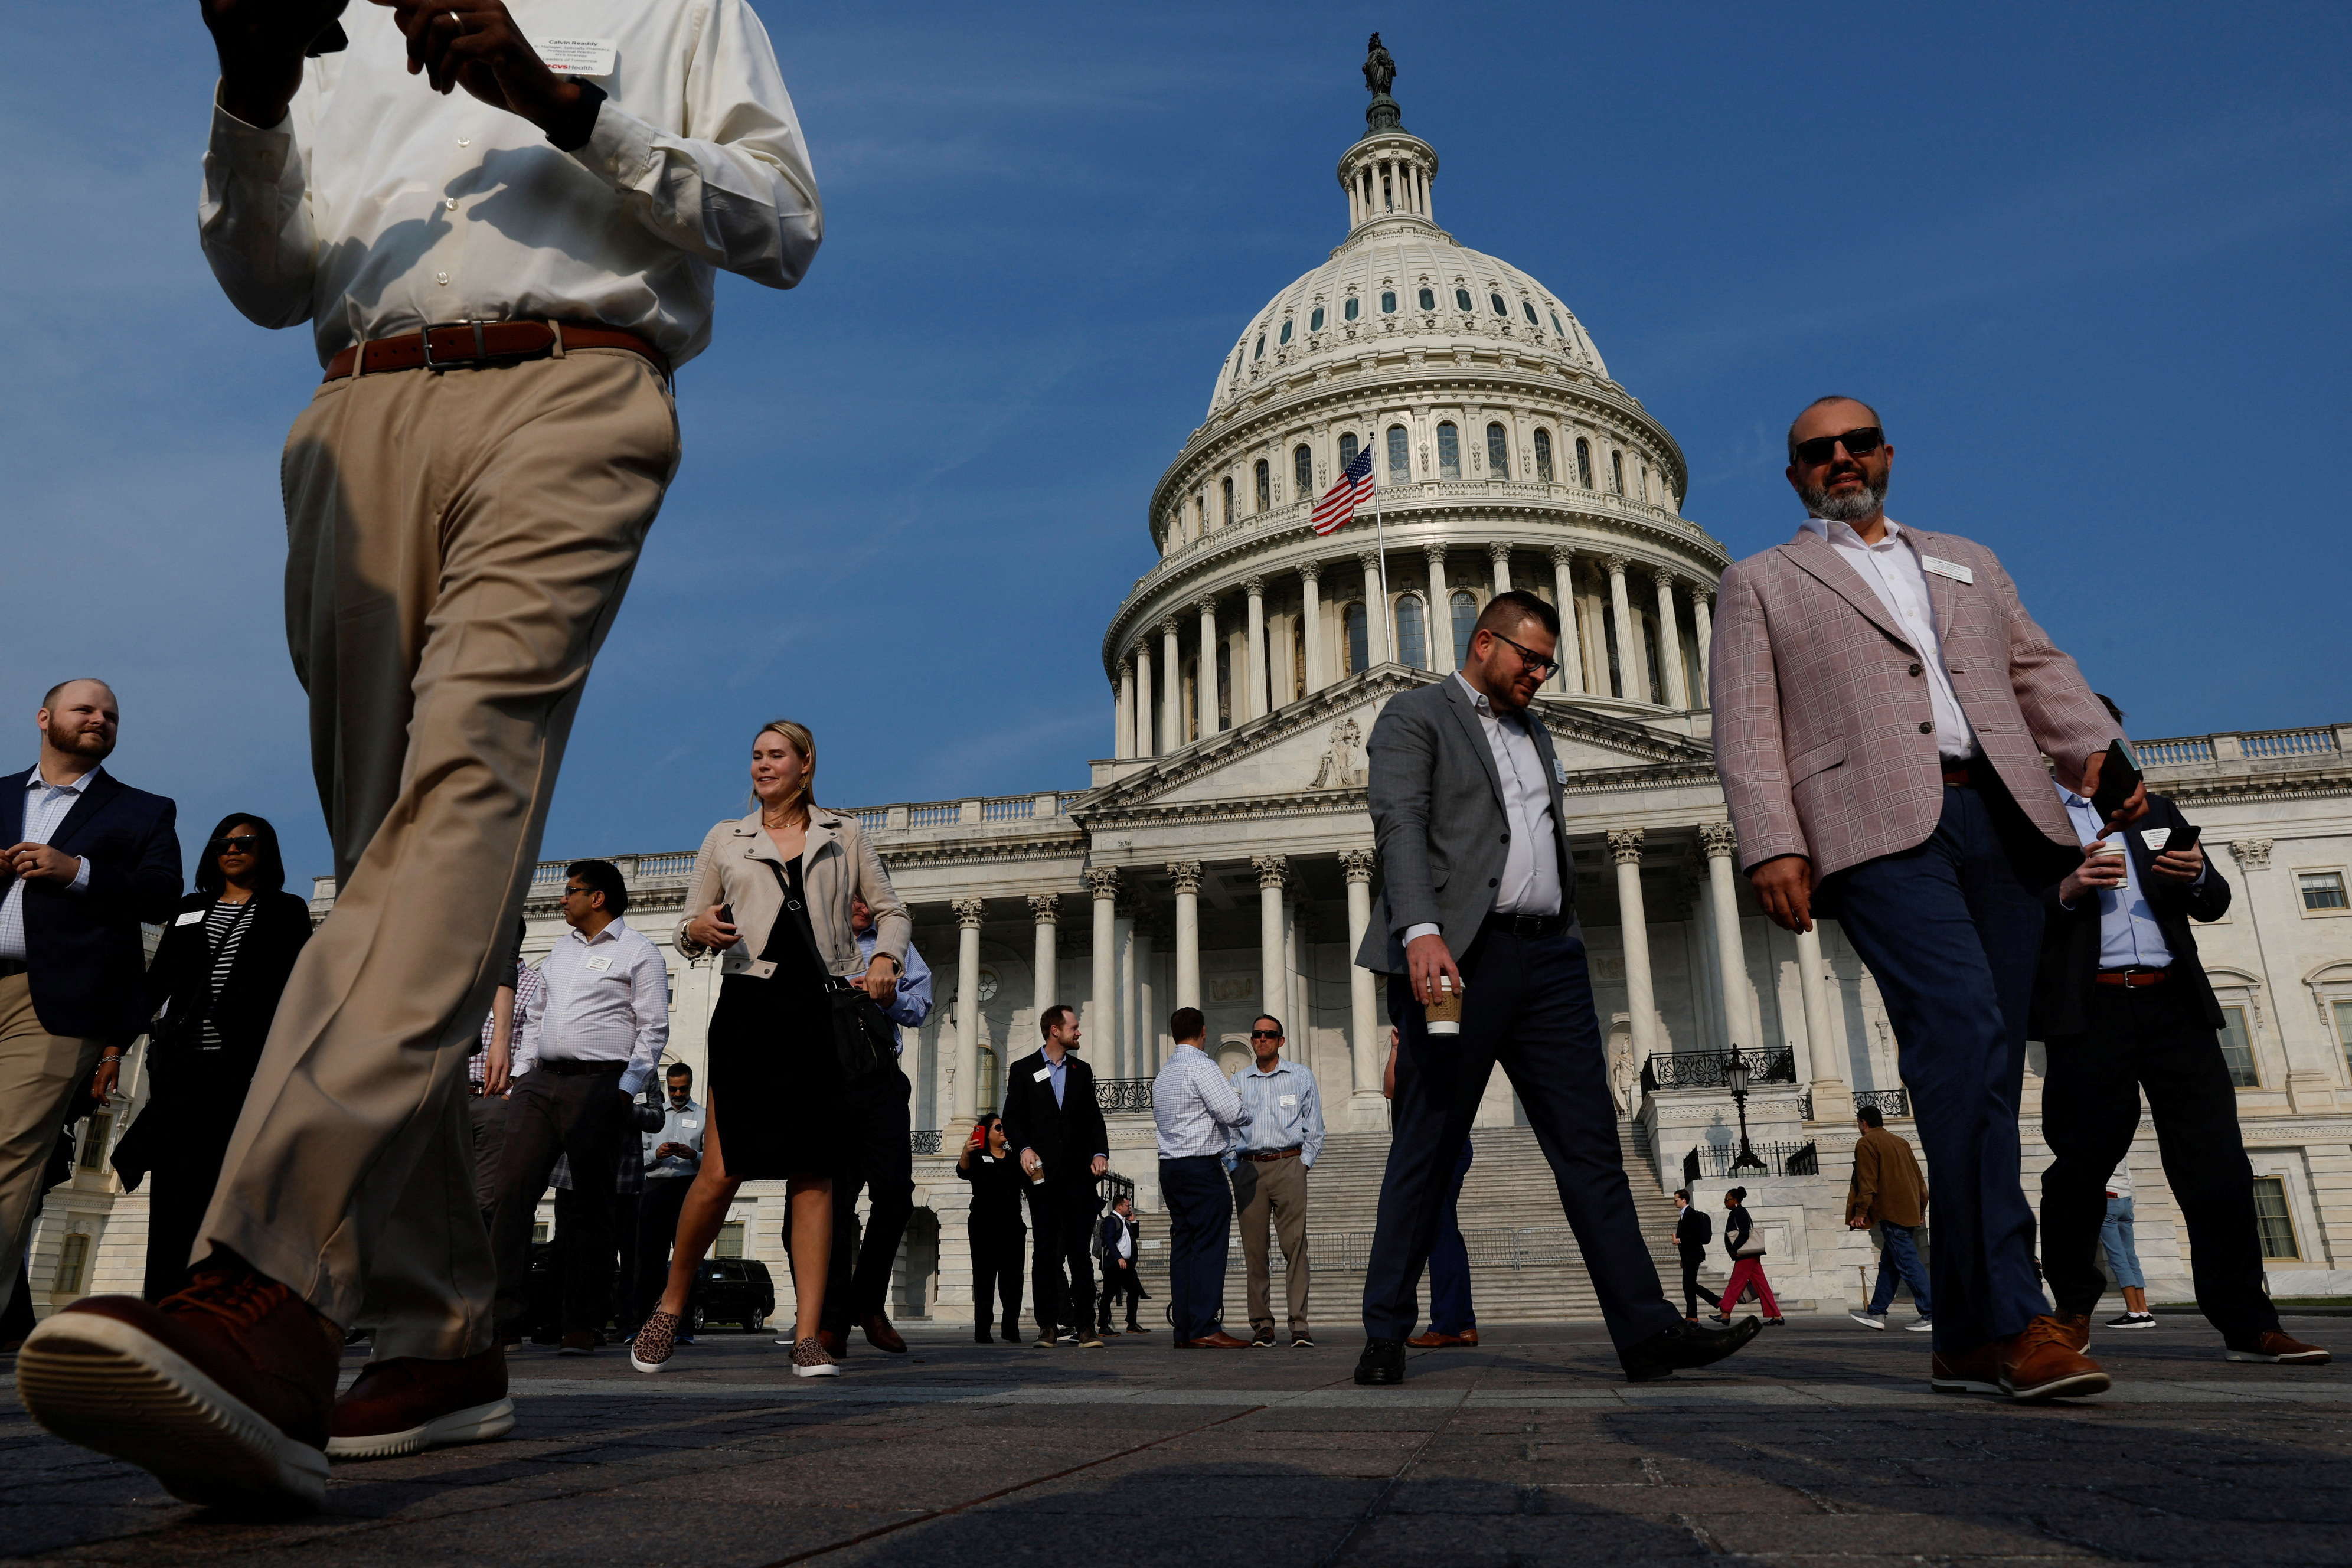 Visitors walk on the plaza at the U.S. Capitol in Washington